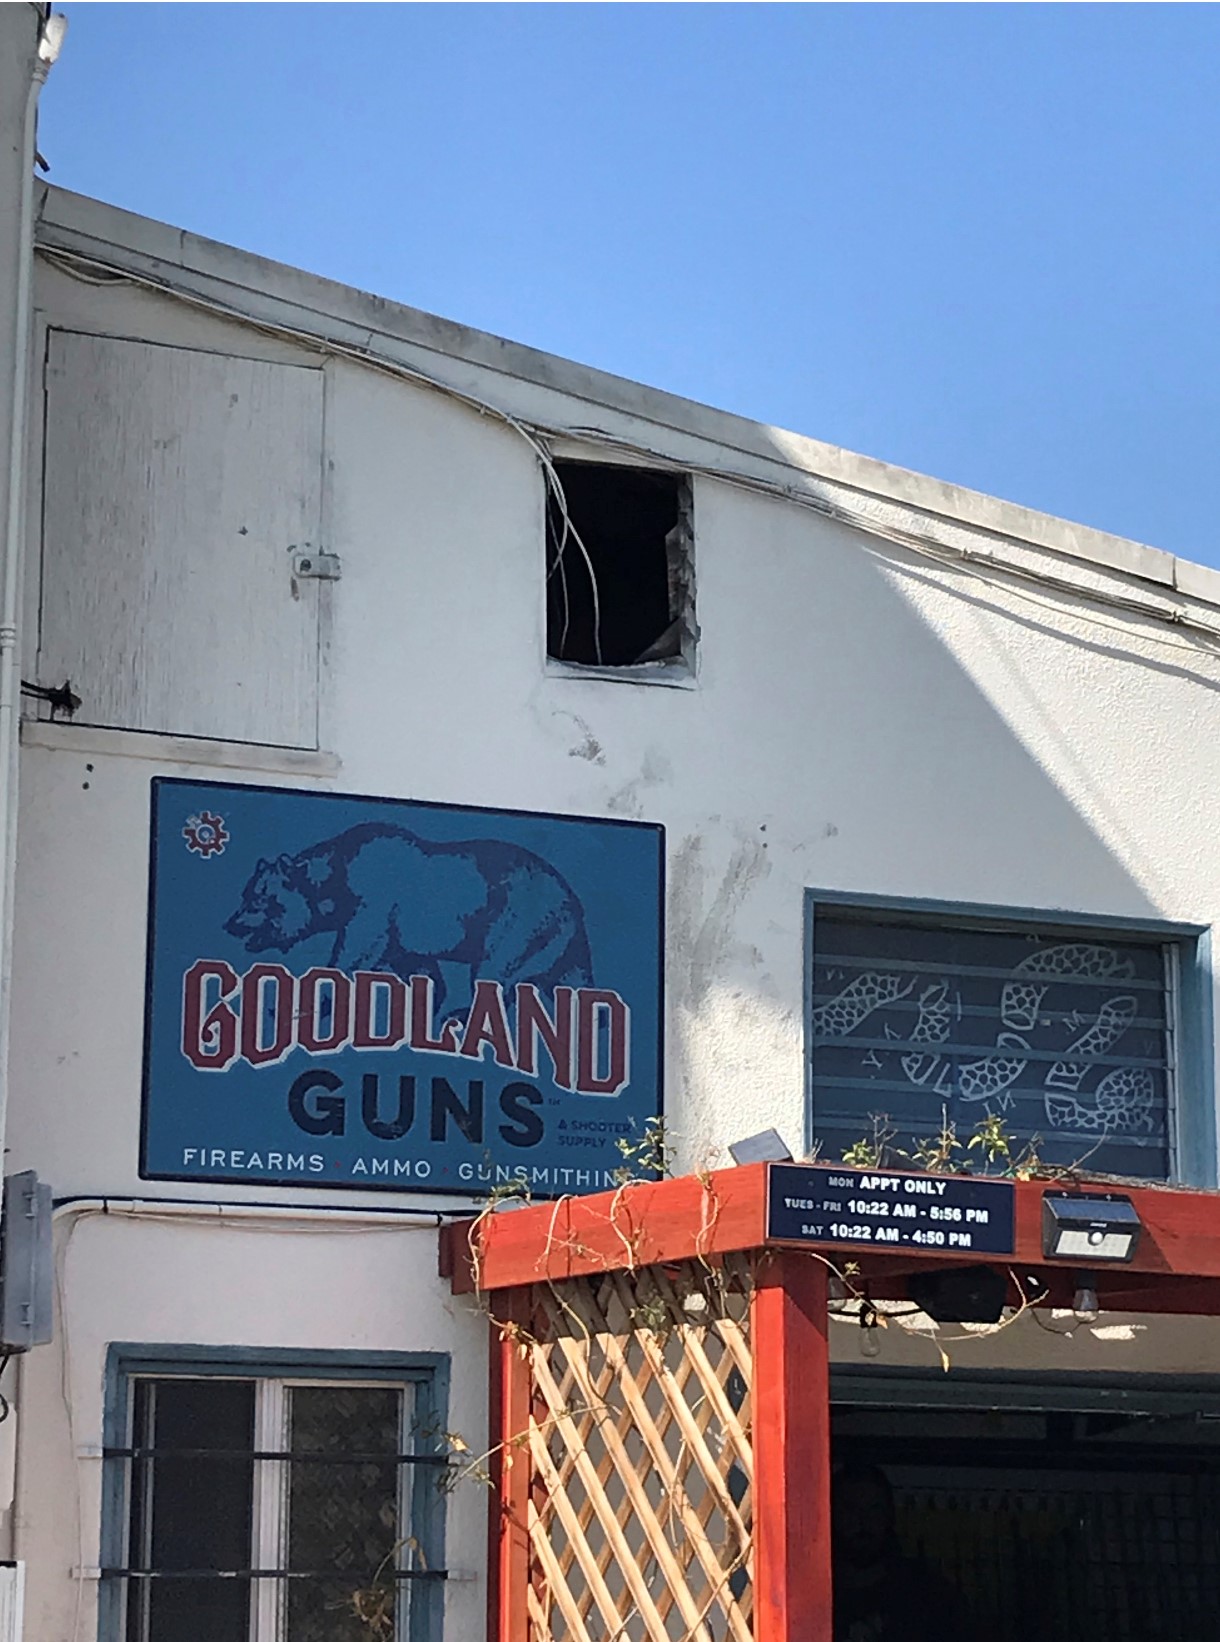 The hole in the wall where the suspect(s) entered into Goodland Guns.